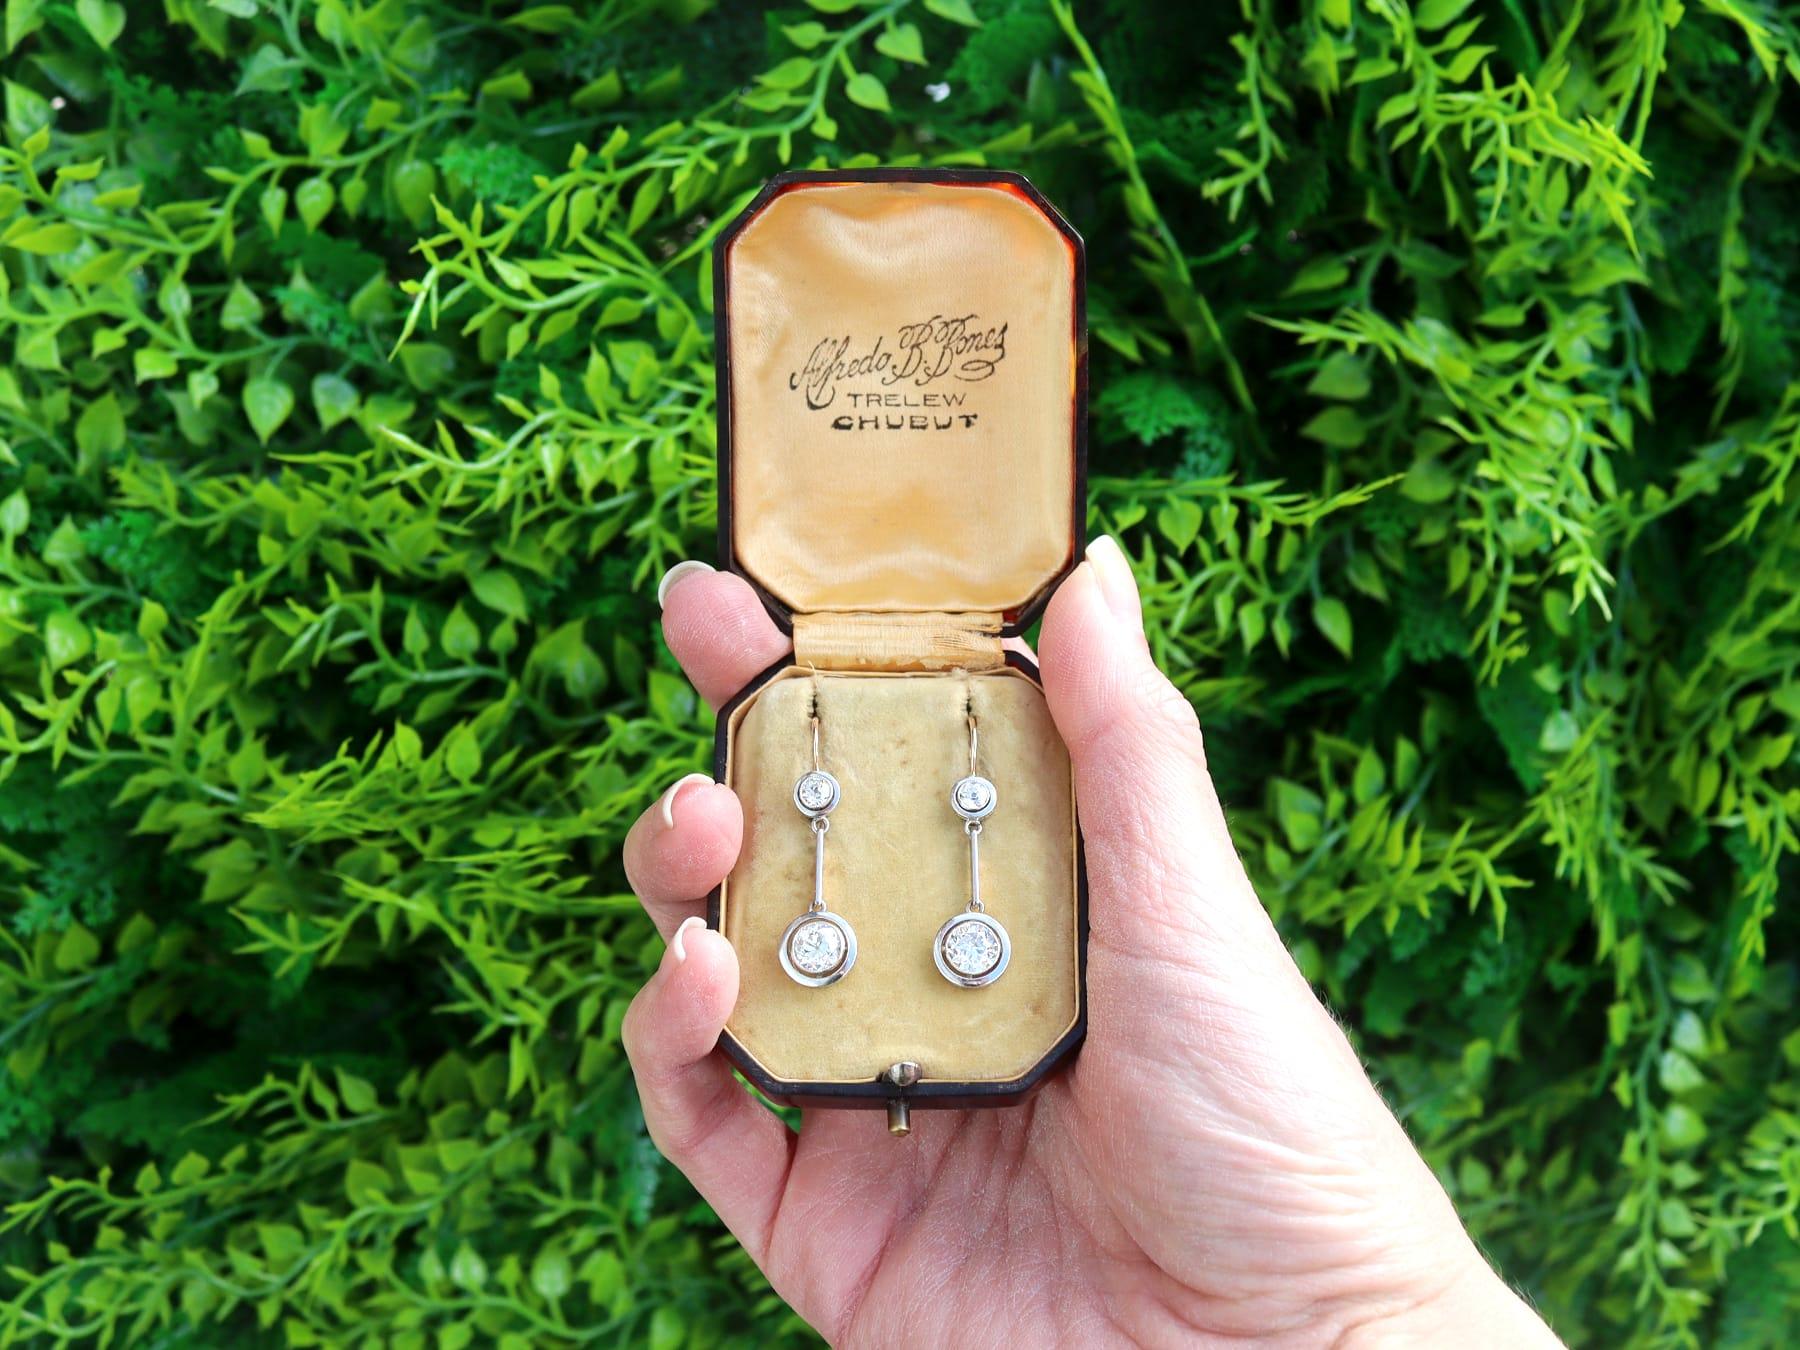 A stunning, fine and impressive pair of antique 2.75 carat diamond and 15 karat yellow gold, platinum set drop earrings - boxed; part of our diverse antique jewelry collections

These stunning, fine and impressive antique drop earrings have been